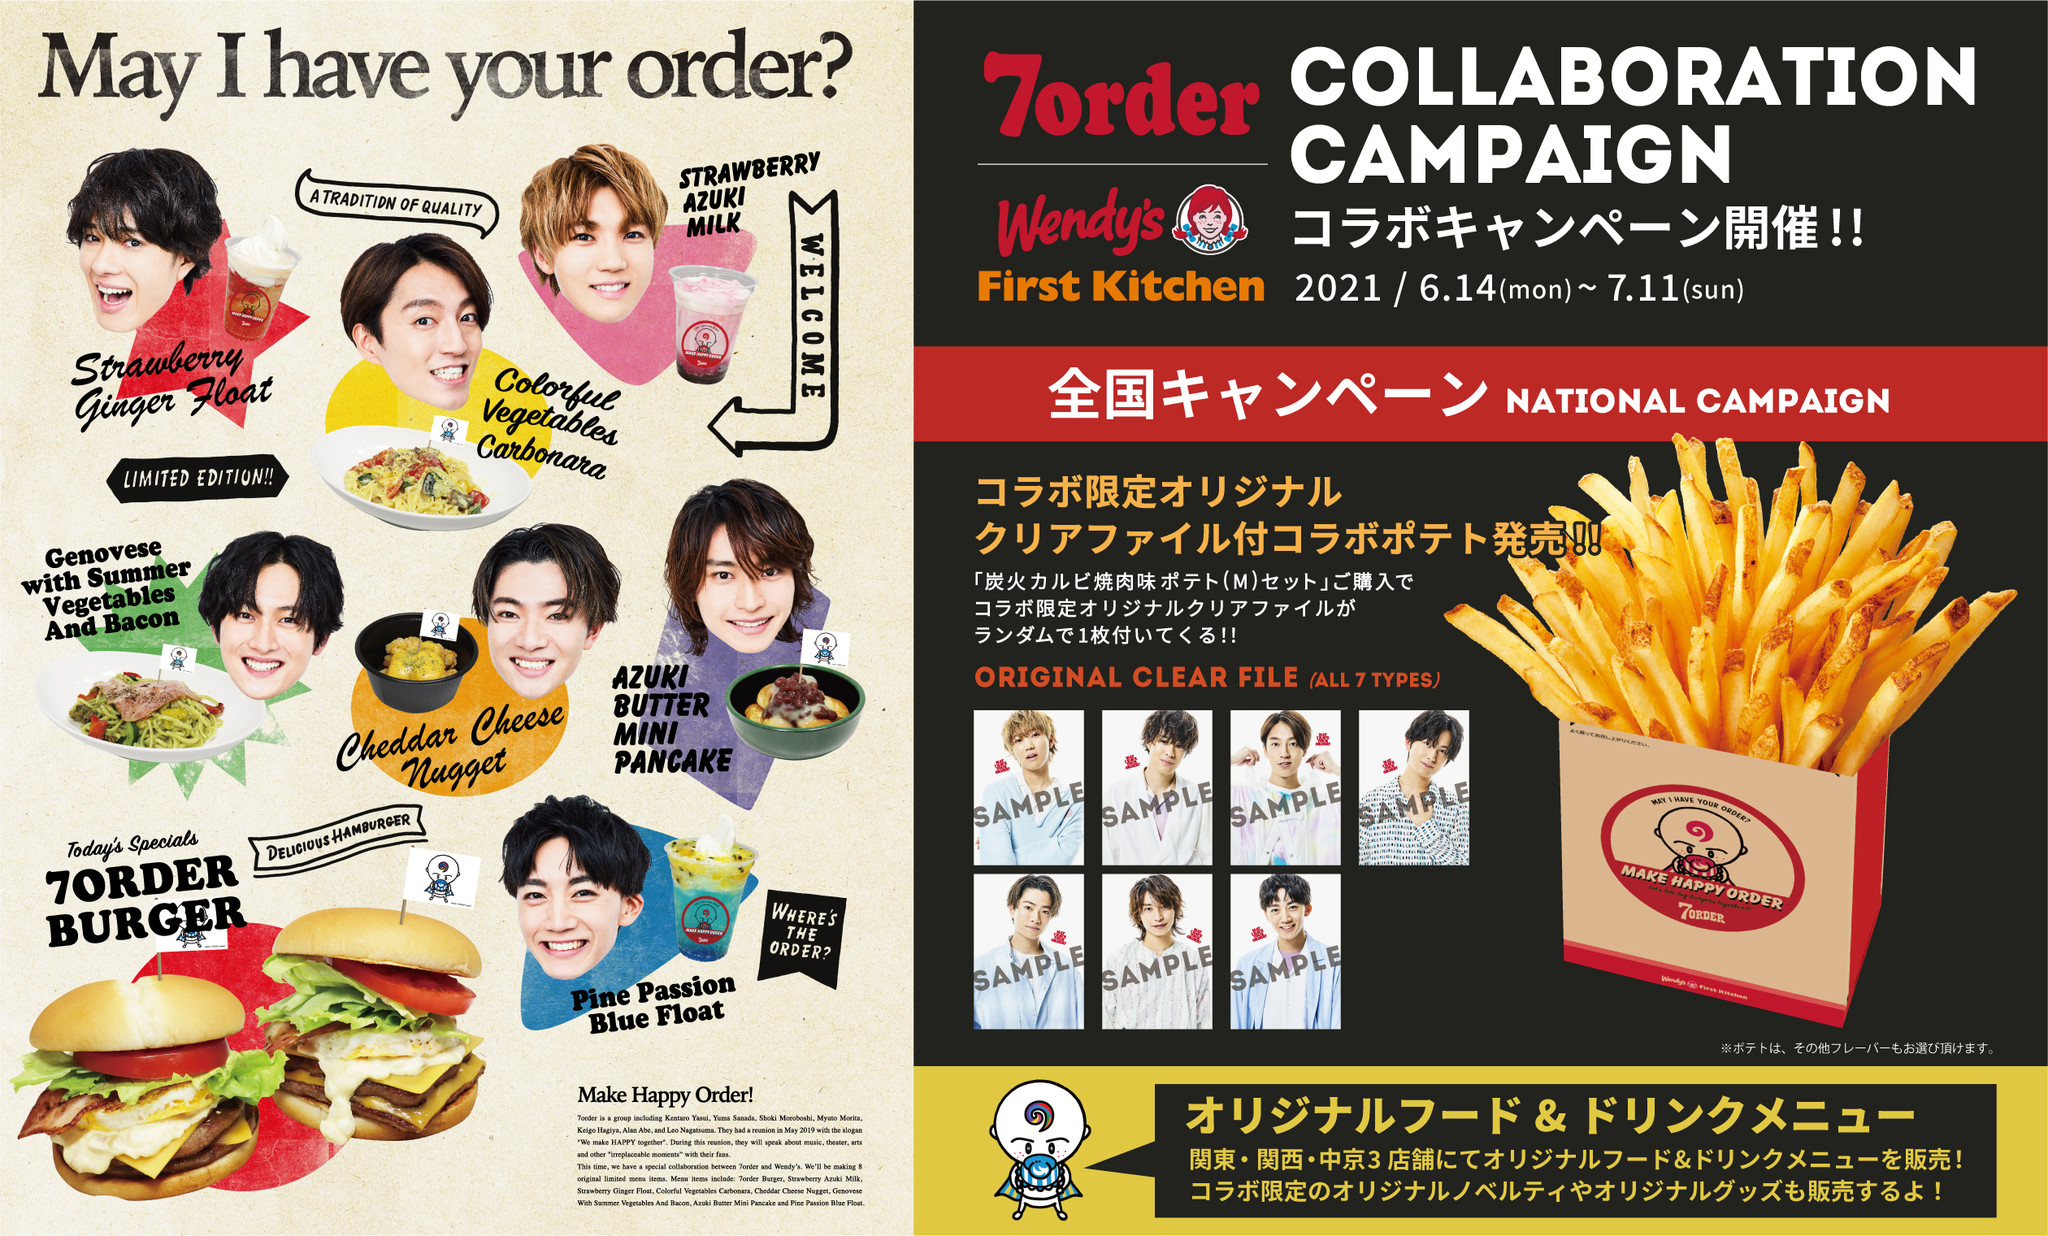 7ORDER クリアファイル